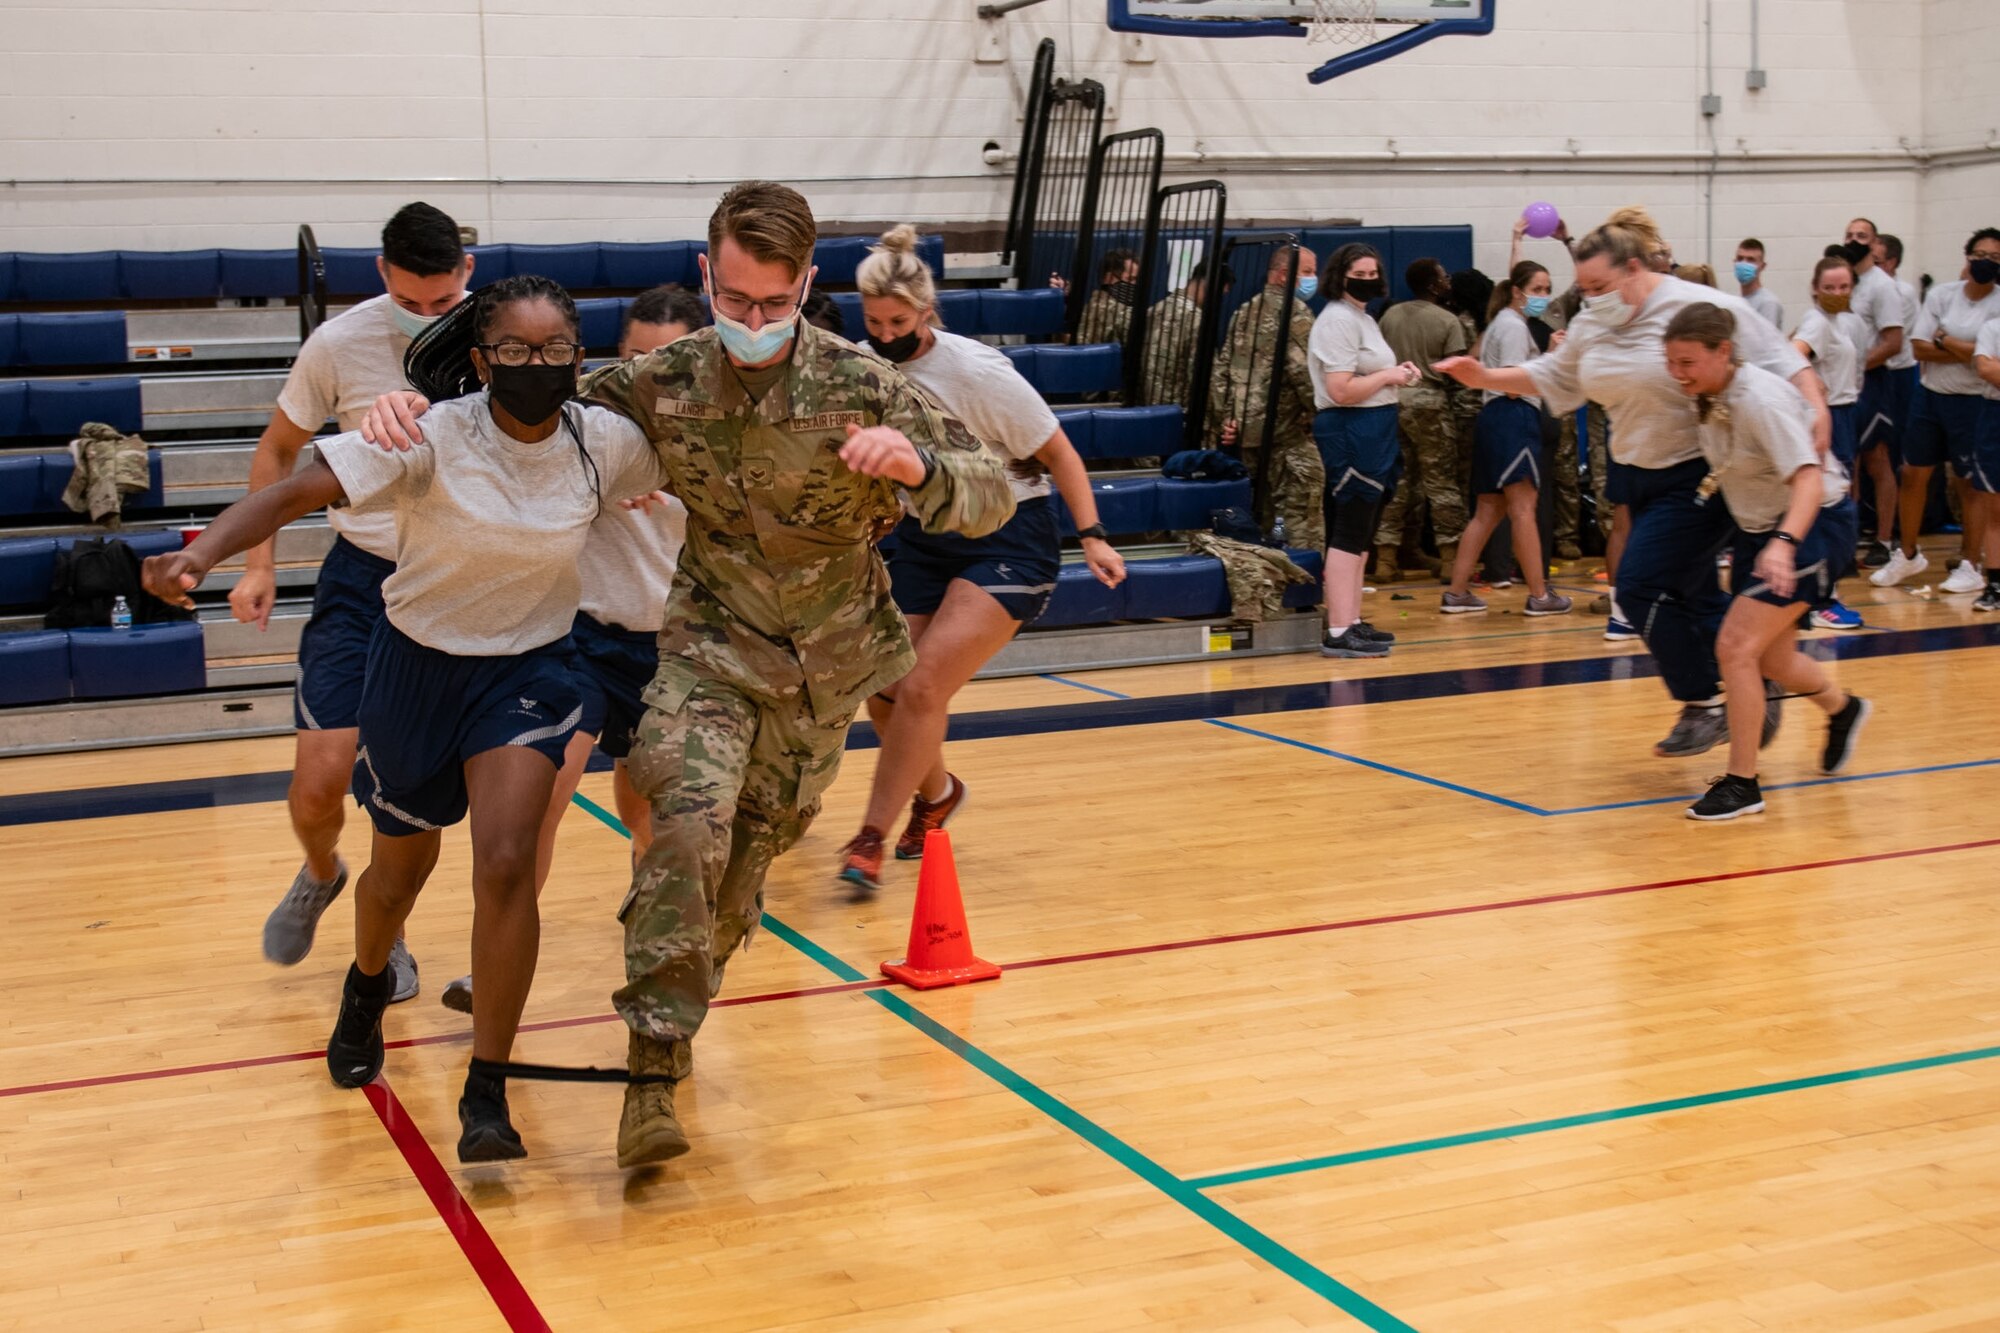 Members of the 932nd Medical Group participate in the three legged race activity during their annual sexual assault prevention and response/suicide prevention training, Scott Air Force Base, Illinois, Sept. 12, 2021. Each activity reviewed the training material, for example during the fit to fight activity a team of airman would be asked a training question and if answered correctly all other groups would do an exercise. (U.S. Air Force Photo by Staff Sgt. Brooke Spenner)